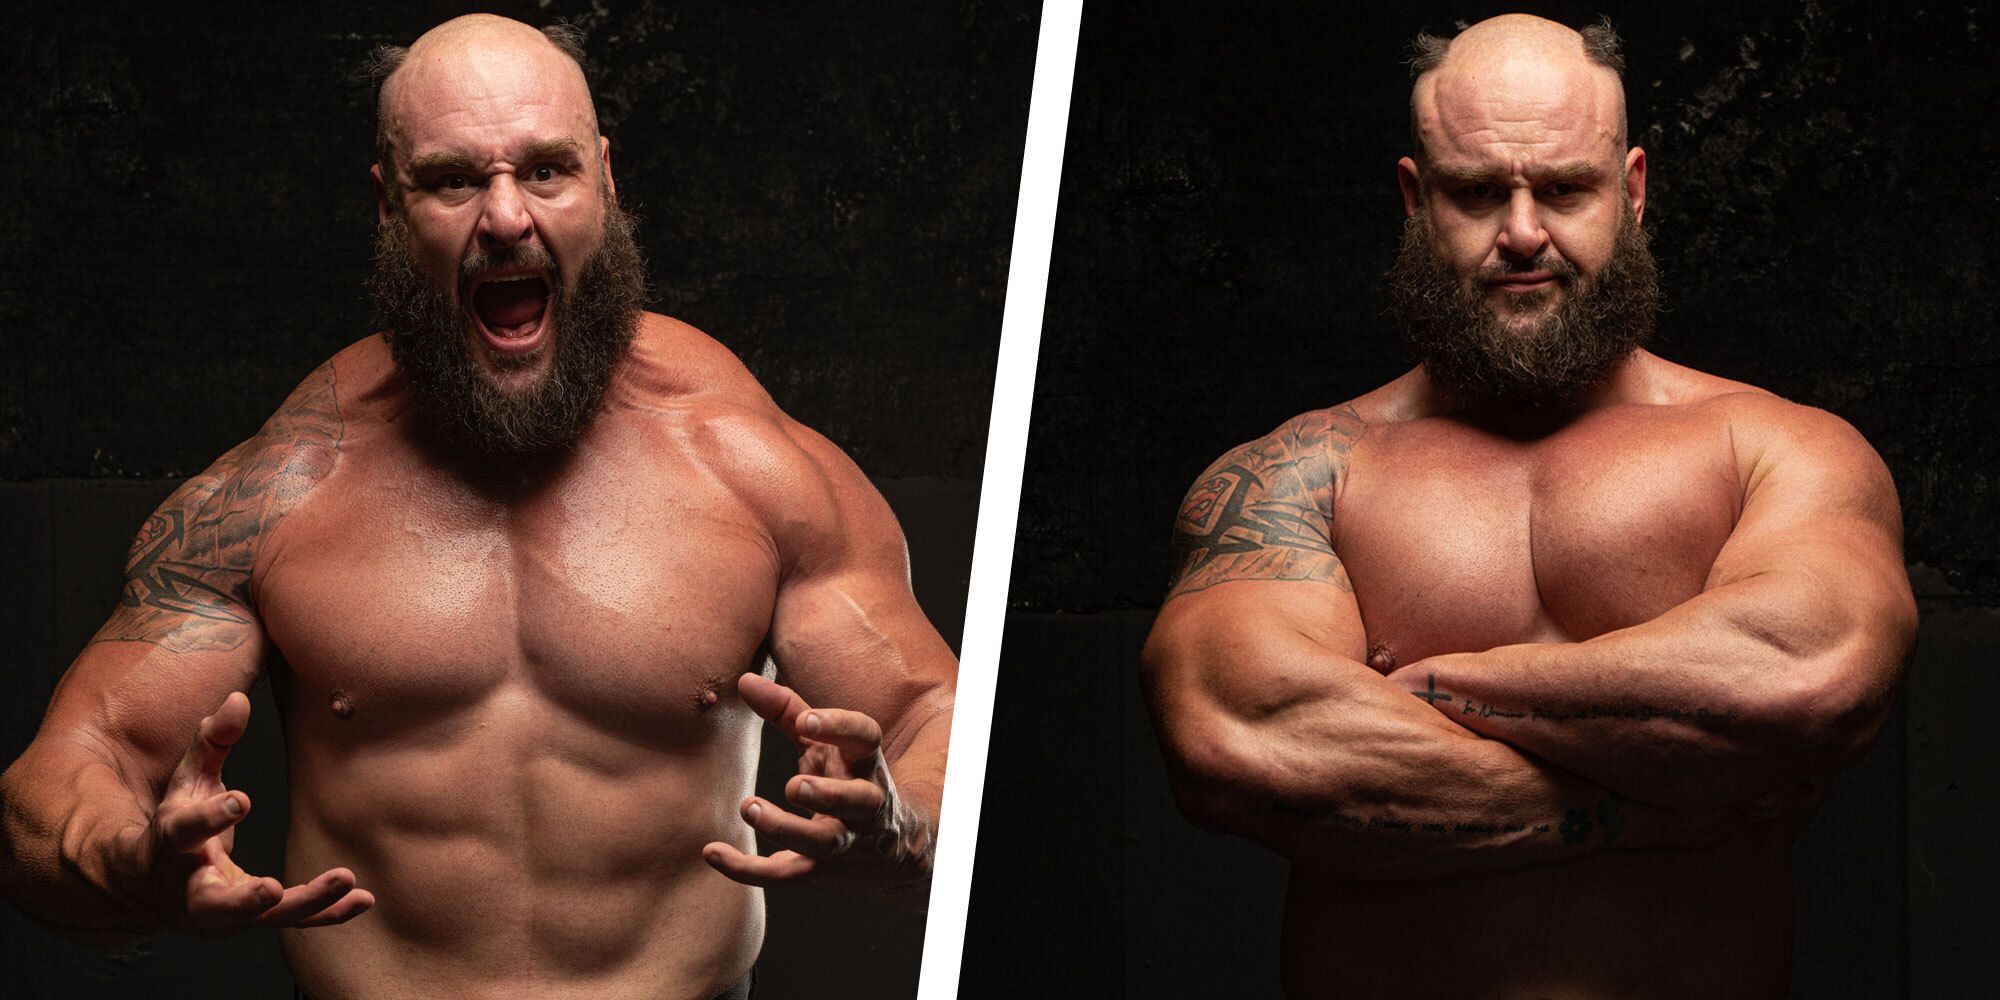 wrestlers before and after steroids